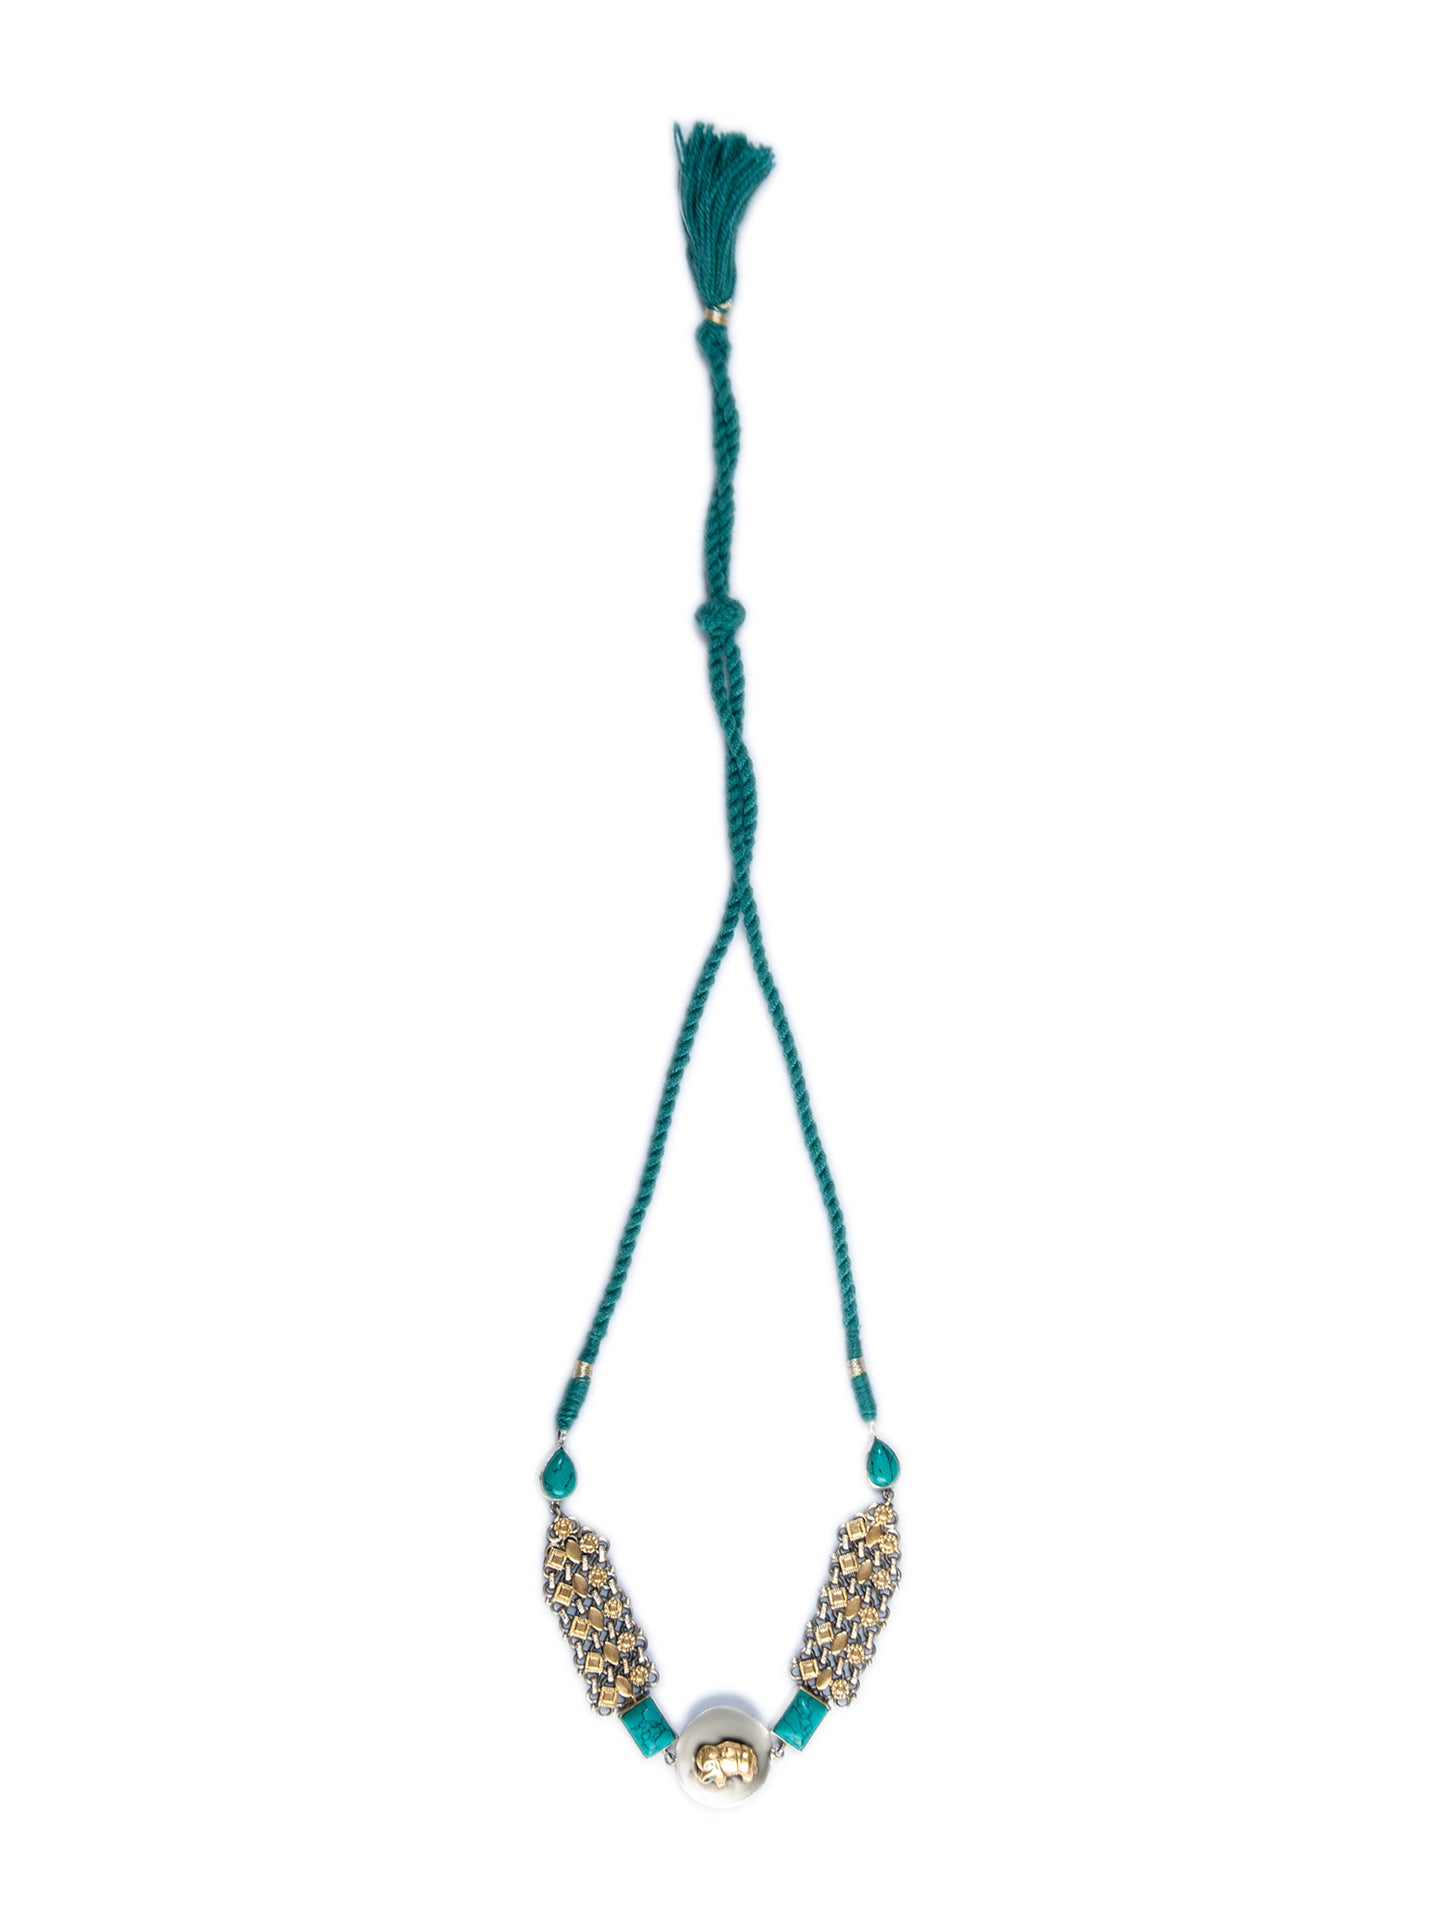 925 Sterling Silver Two Tone 22K Gold Plated Elephant Design Necklace With Turquoise Gemstone